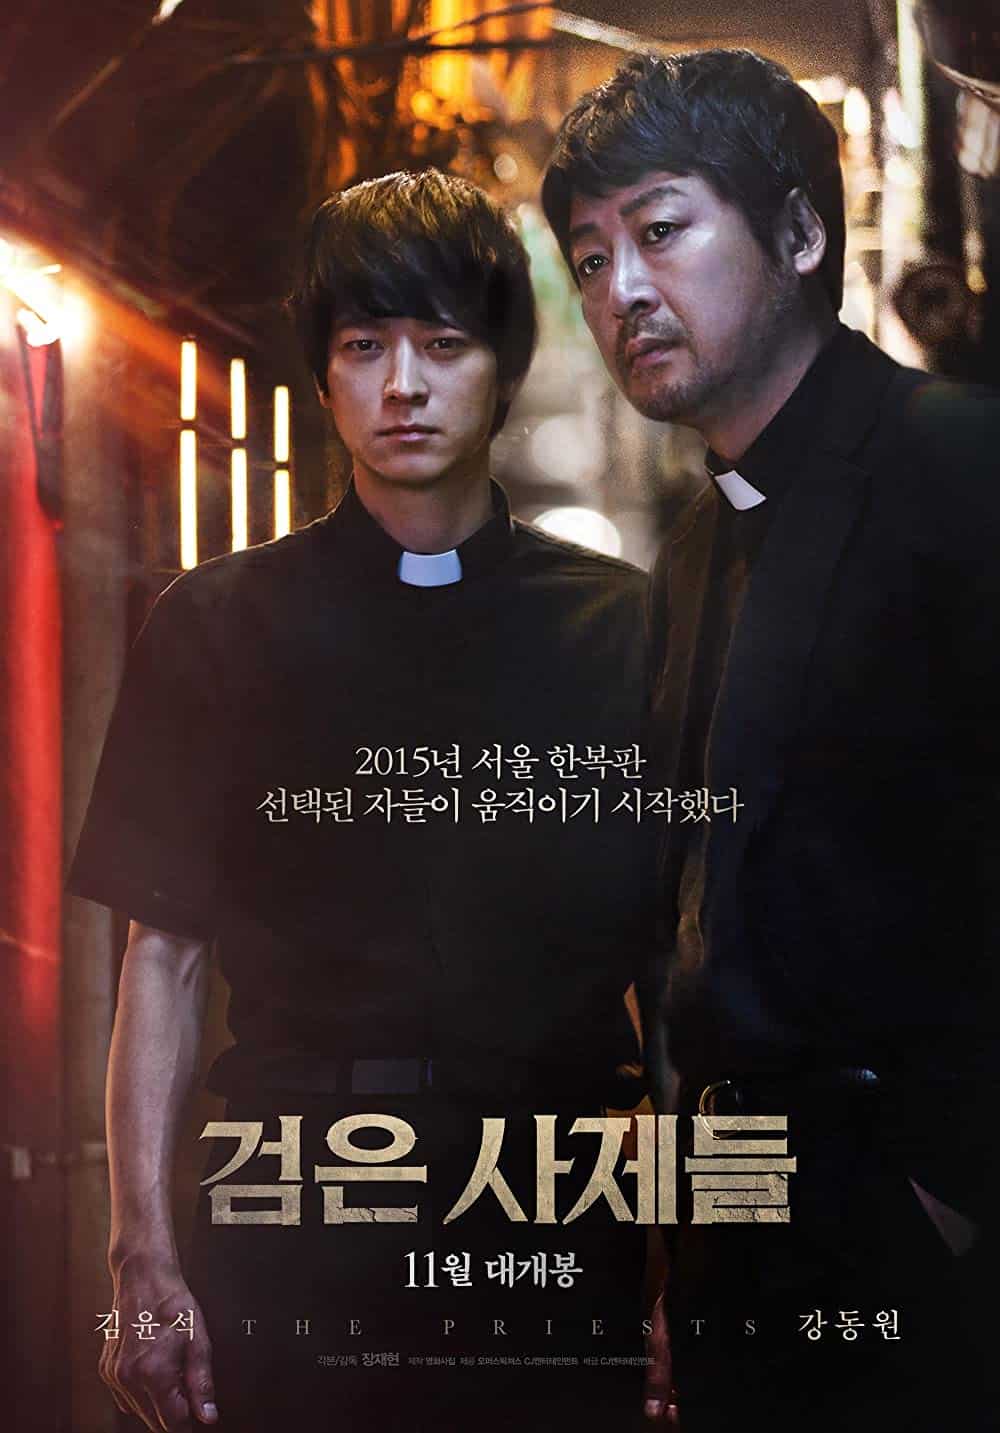 The Priests (2015) Best Exorcism Movies You Can't Miss